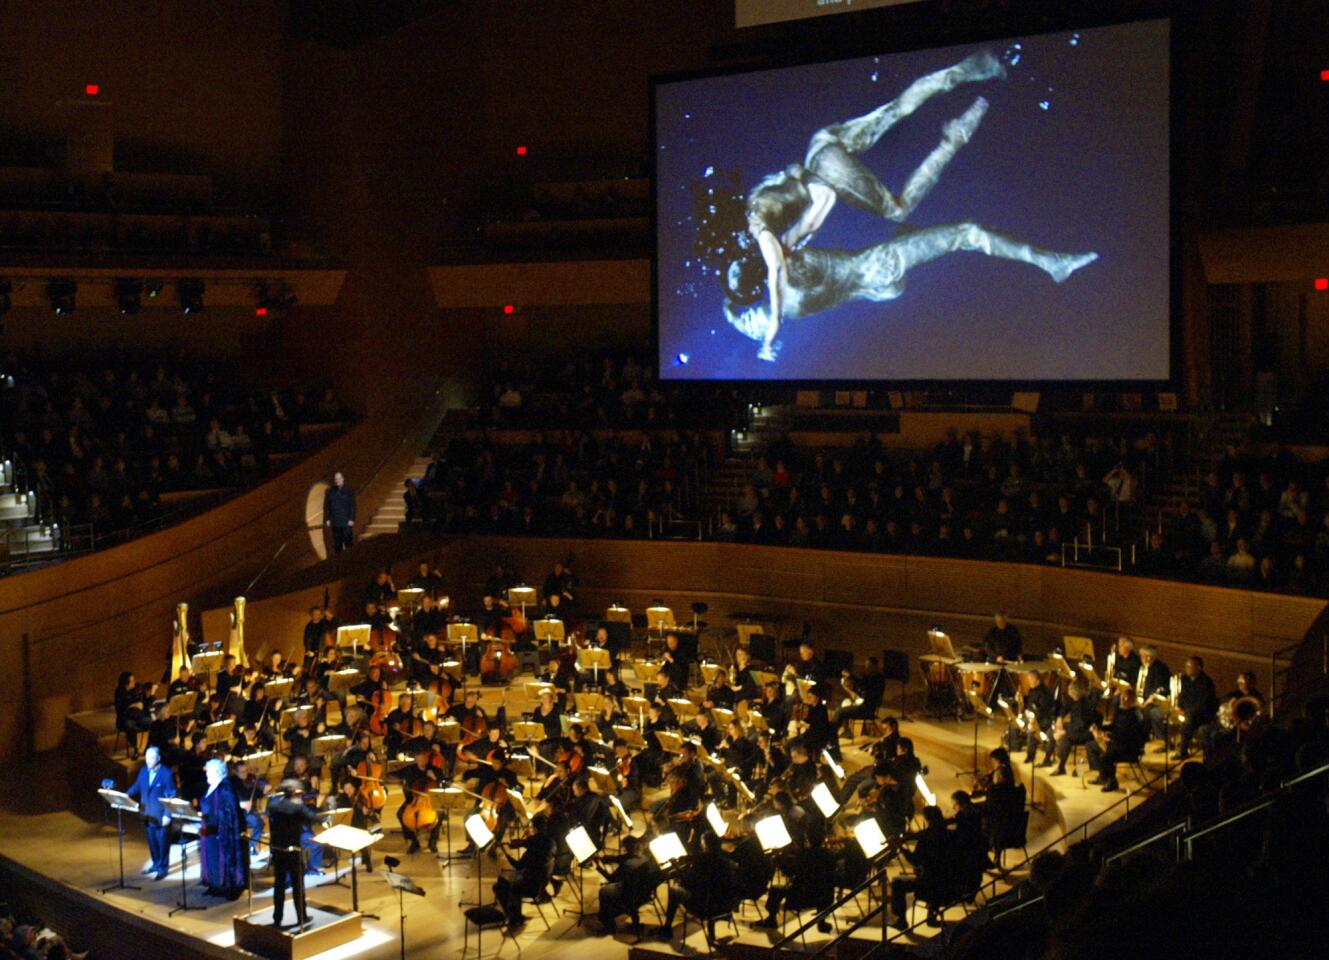 The question for the L.A. Phil after its initial season at Disney Hall was how to top the sheer excitement that the opening had caused. The answer was the "Tristan Project."